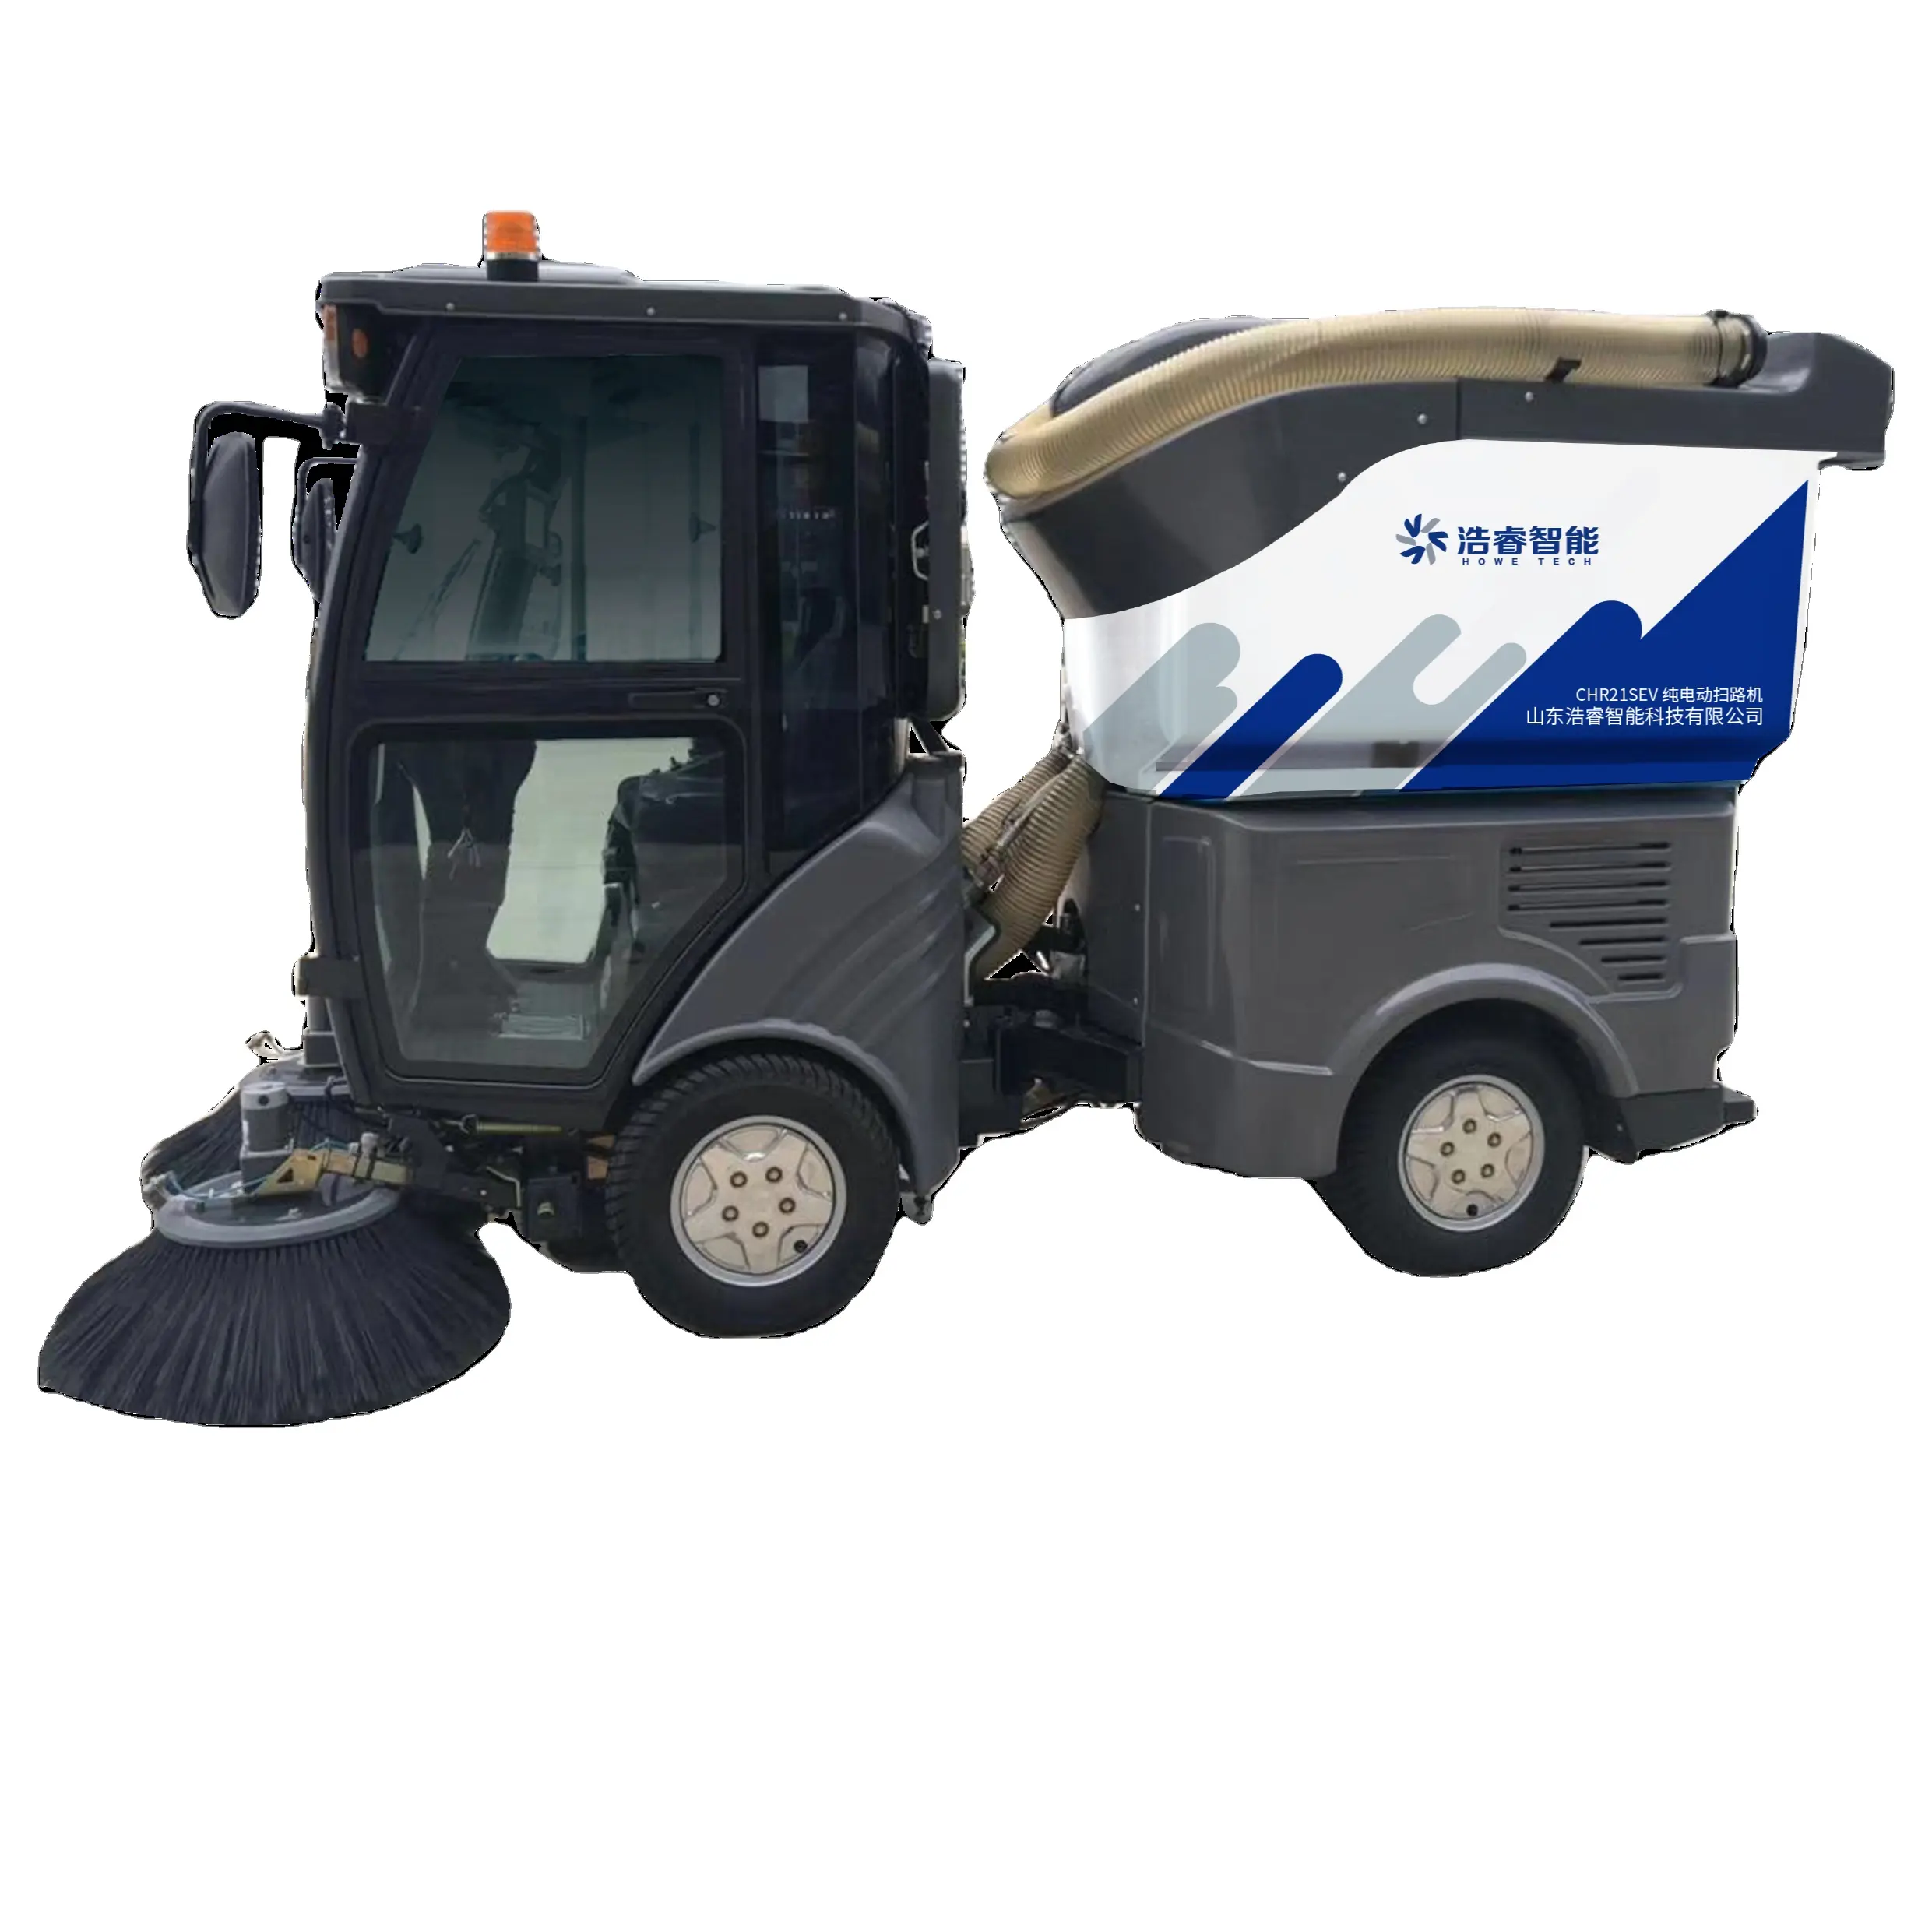 New Compact Electric Road Sweeper Ride-On Sidewalk Sweeping Machine with Efficient Motor and Gearbox